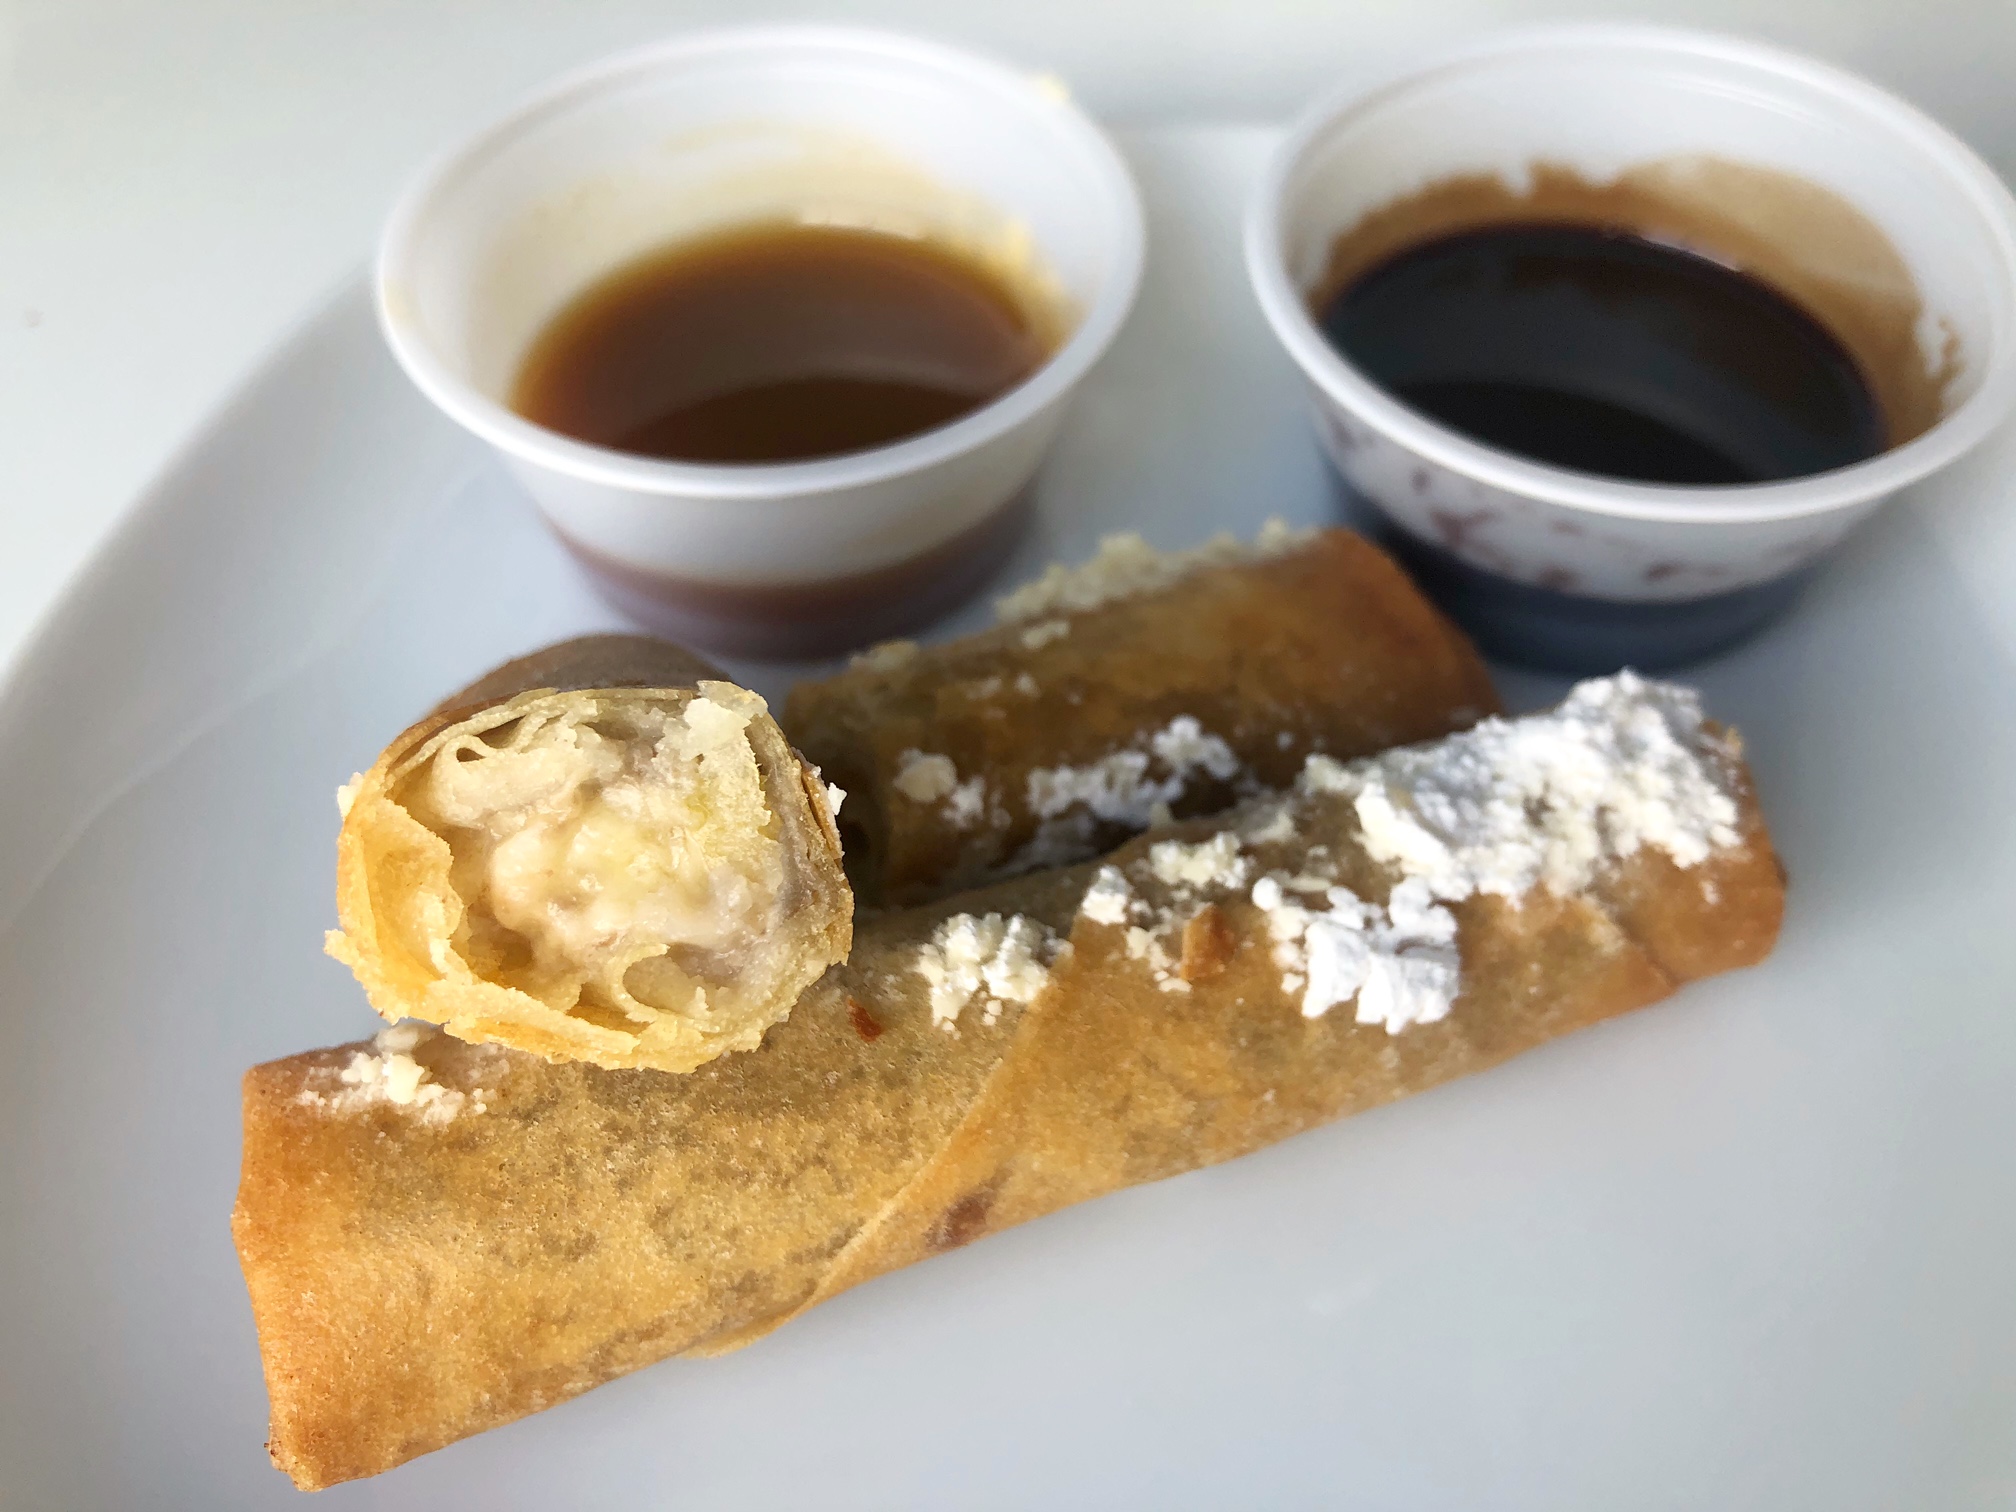 Two dessert eggrolls from A Taste of Both Worlds sit on a white plate. One is intact and the other is sliced in half, revealing the middle. Two little sauces are behind them. Photo by Alyssa Buckley.